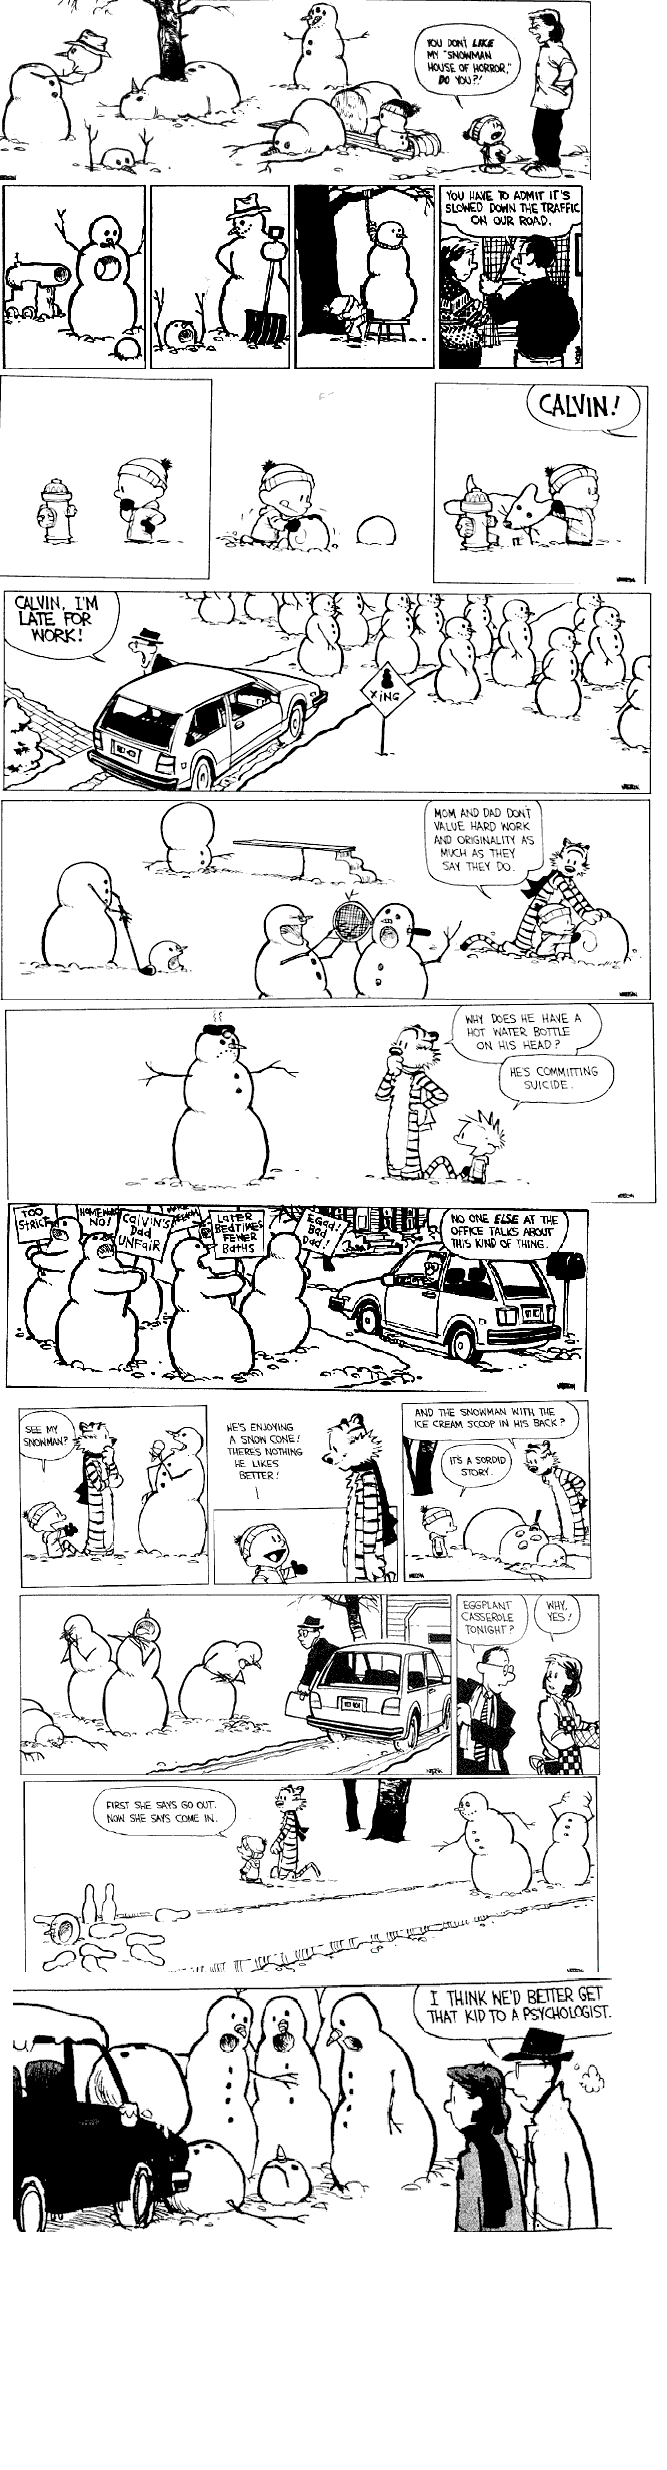 Calvin and Hobbes Snowman House of Horror